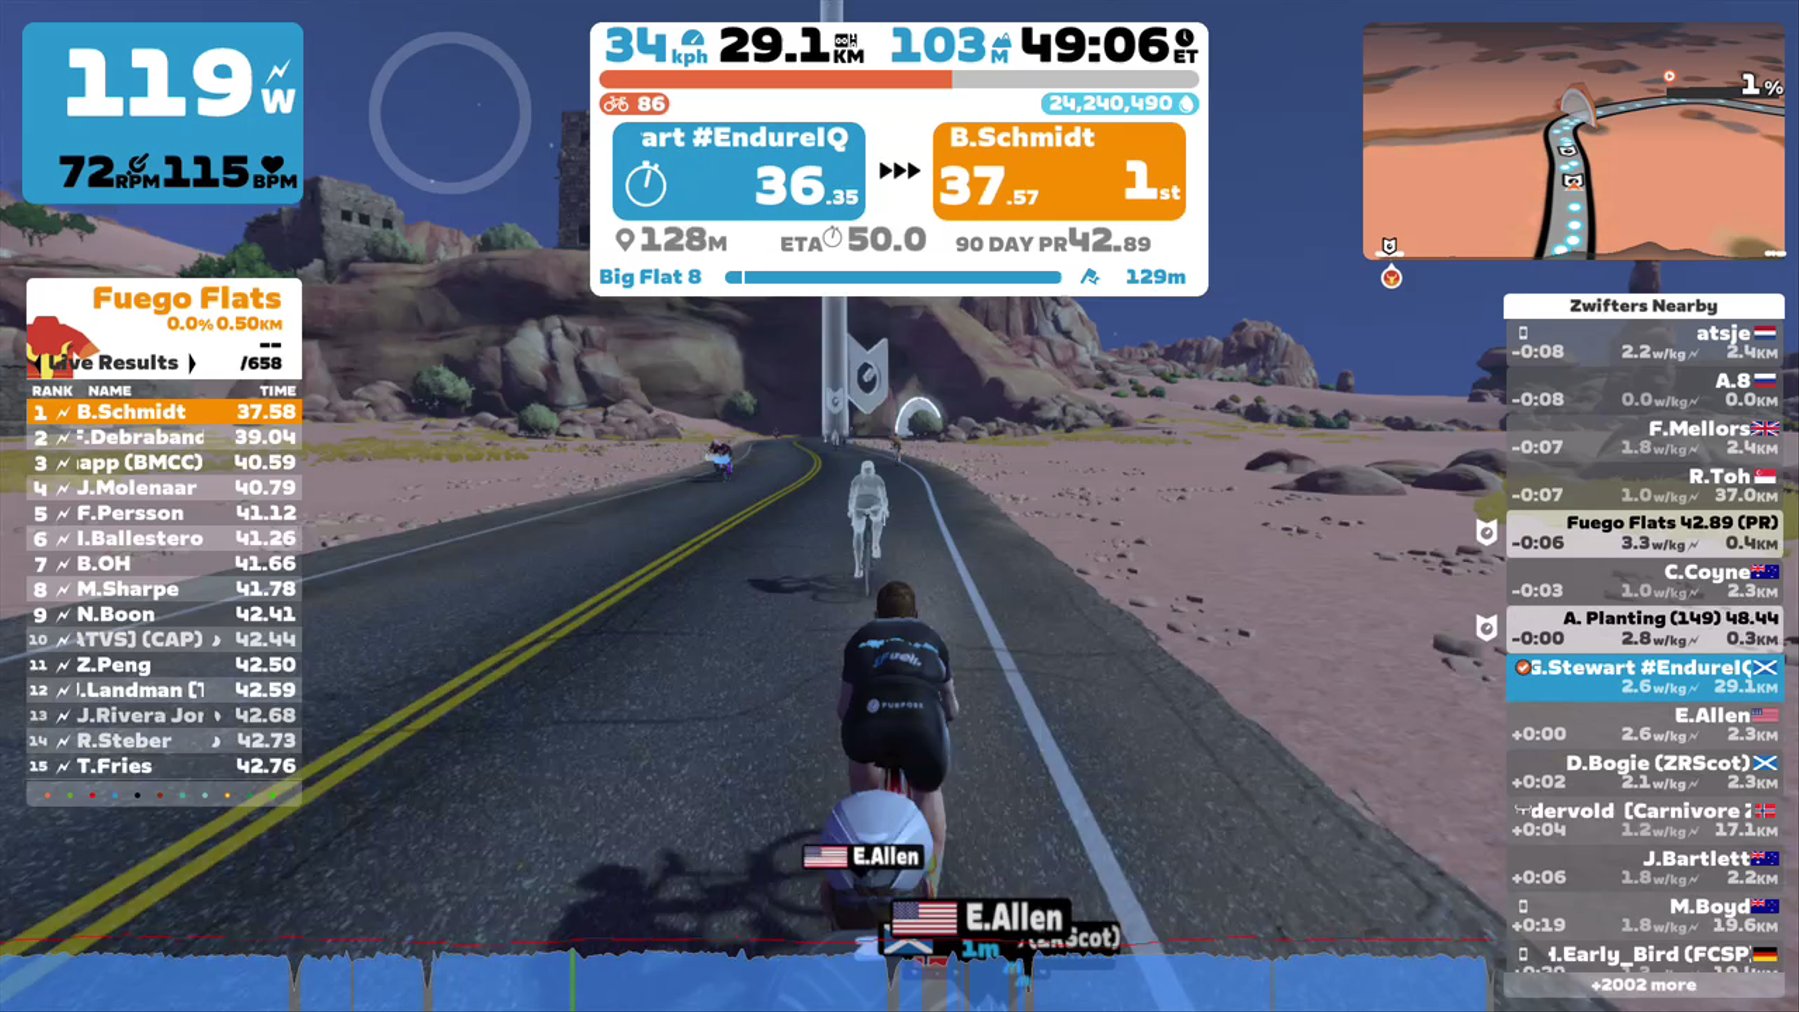 Zwift - New Workout on Big Flat 8 in Watopia